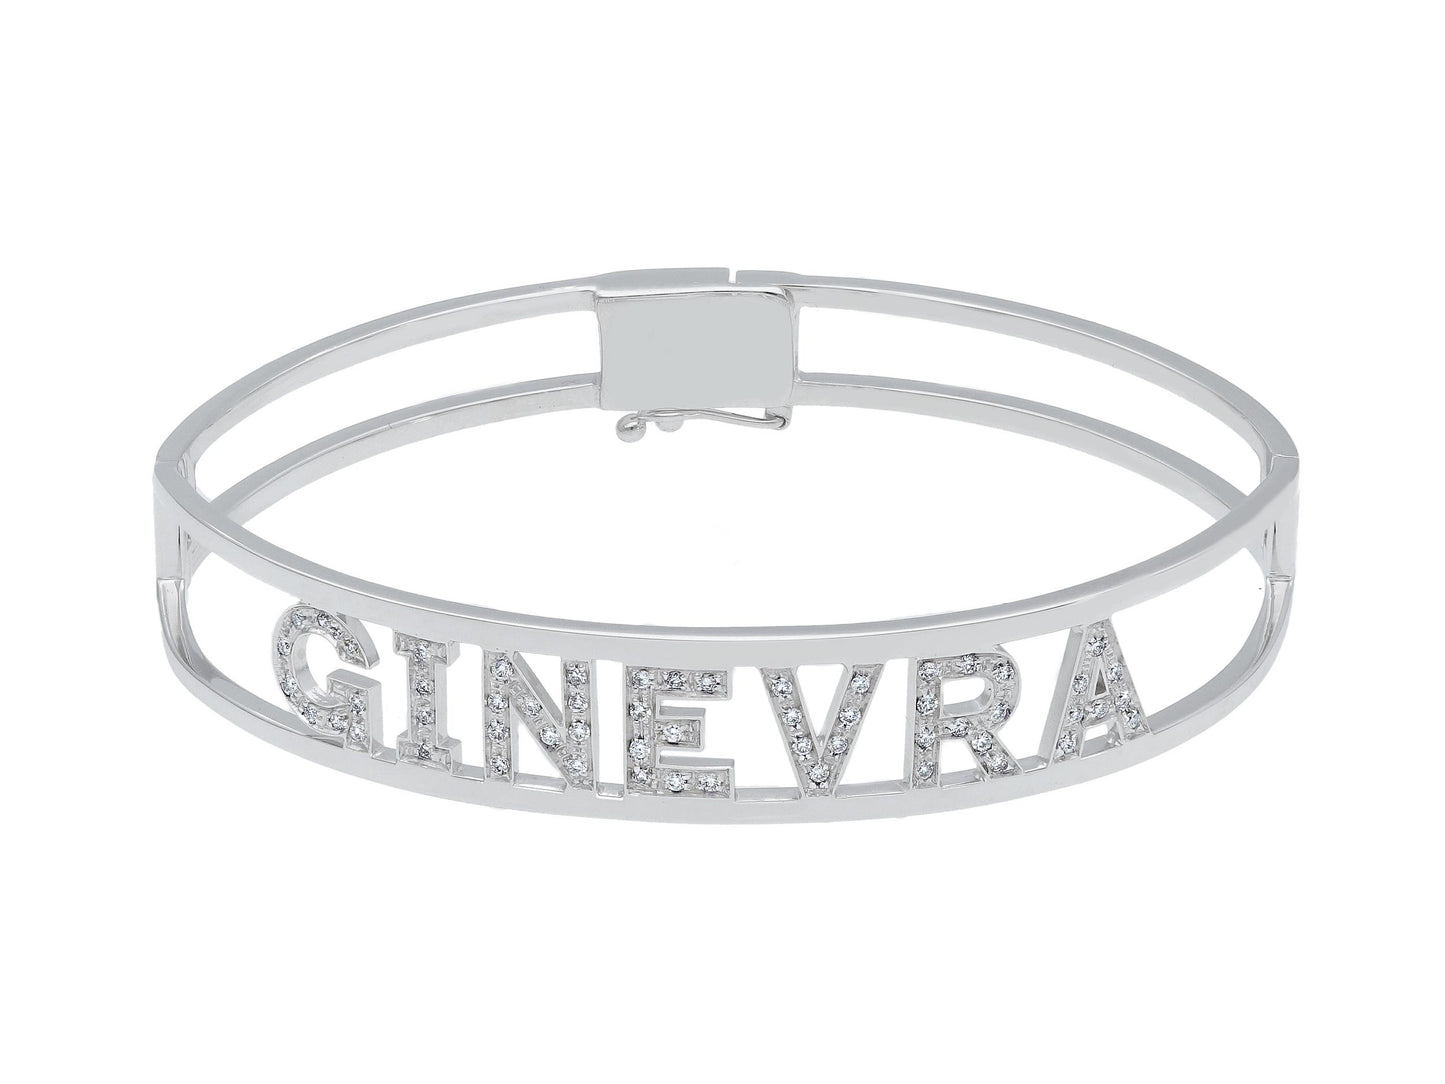 Rigid white gold and diamond bracelet - customizable from 3 to 9 letters